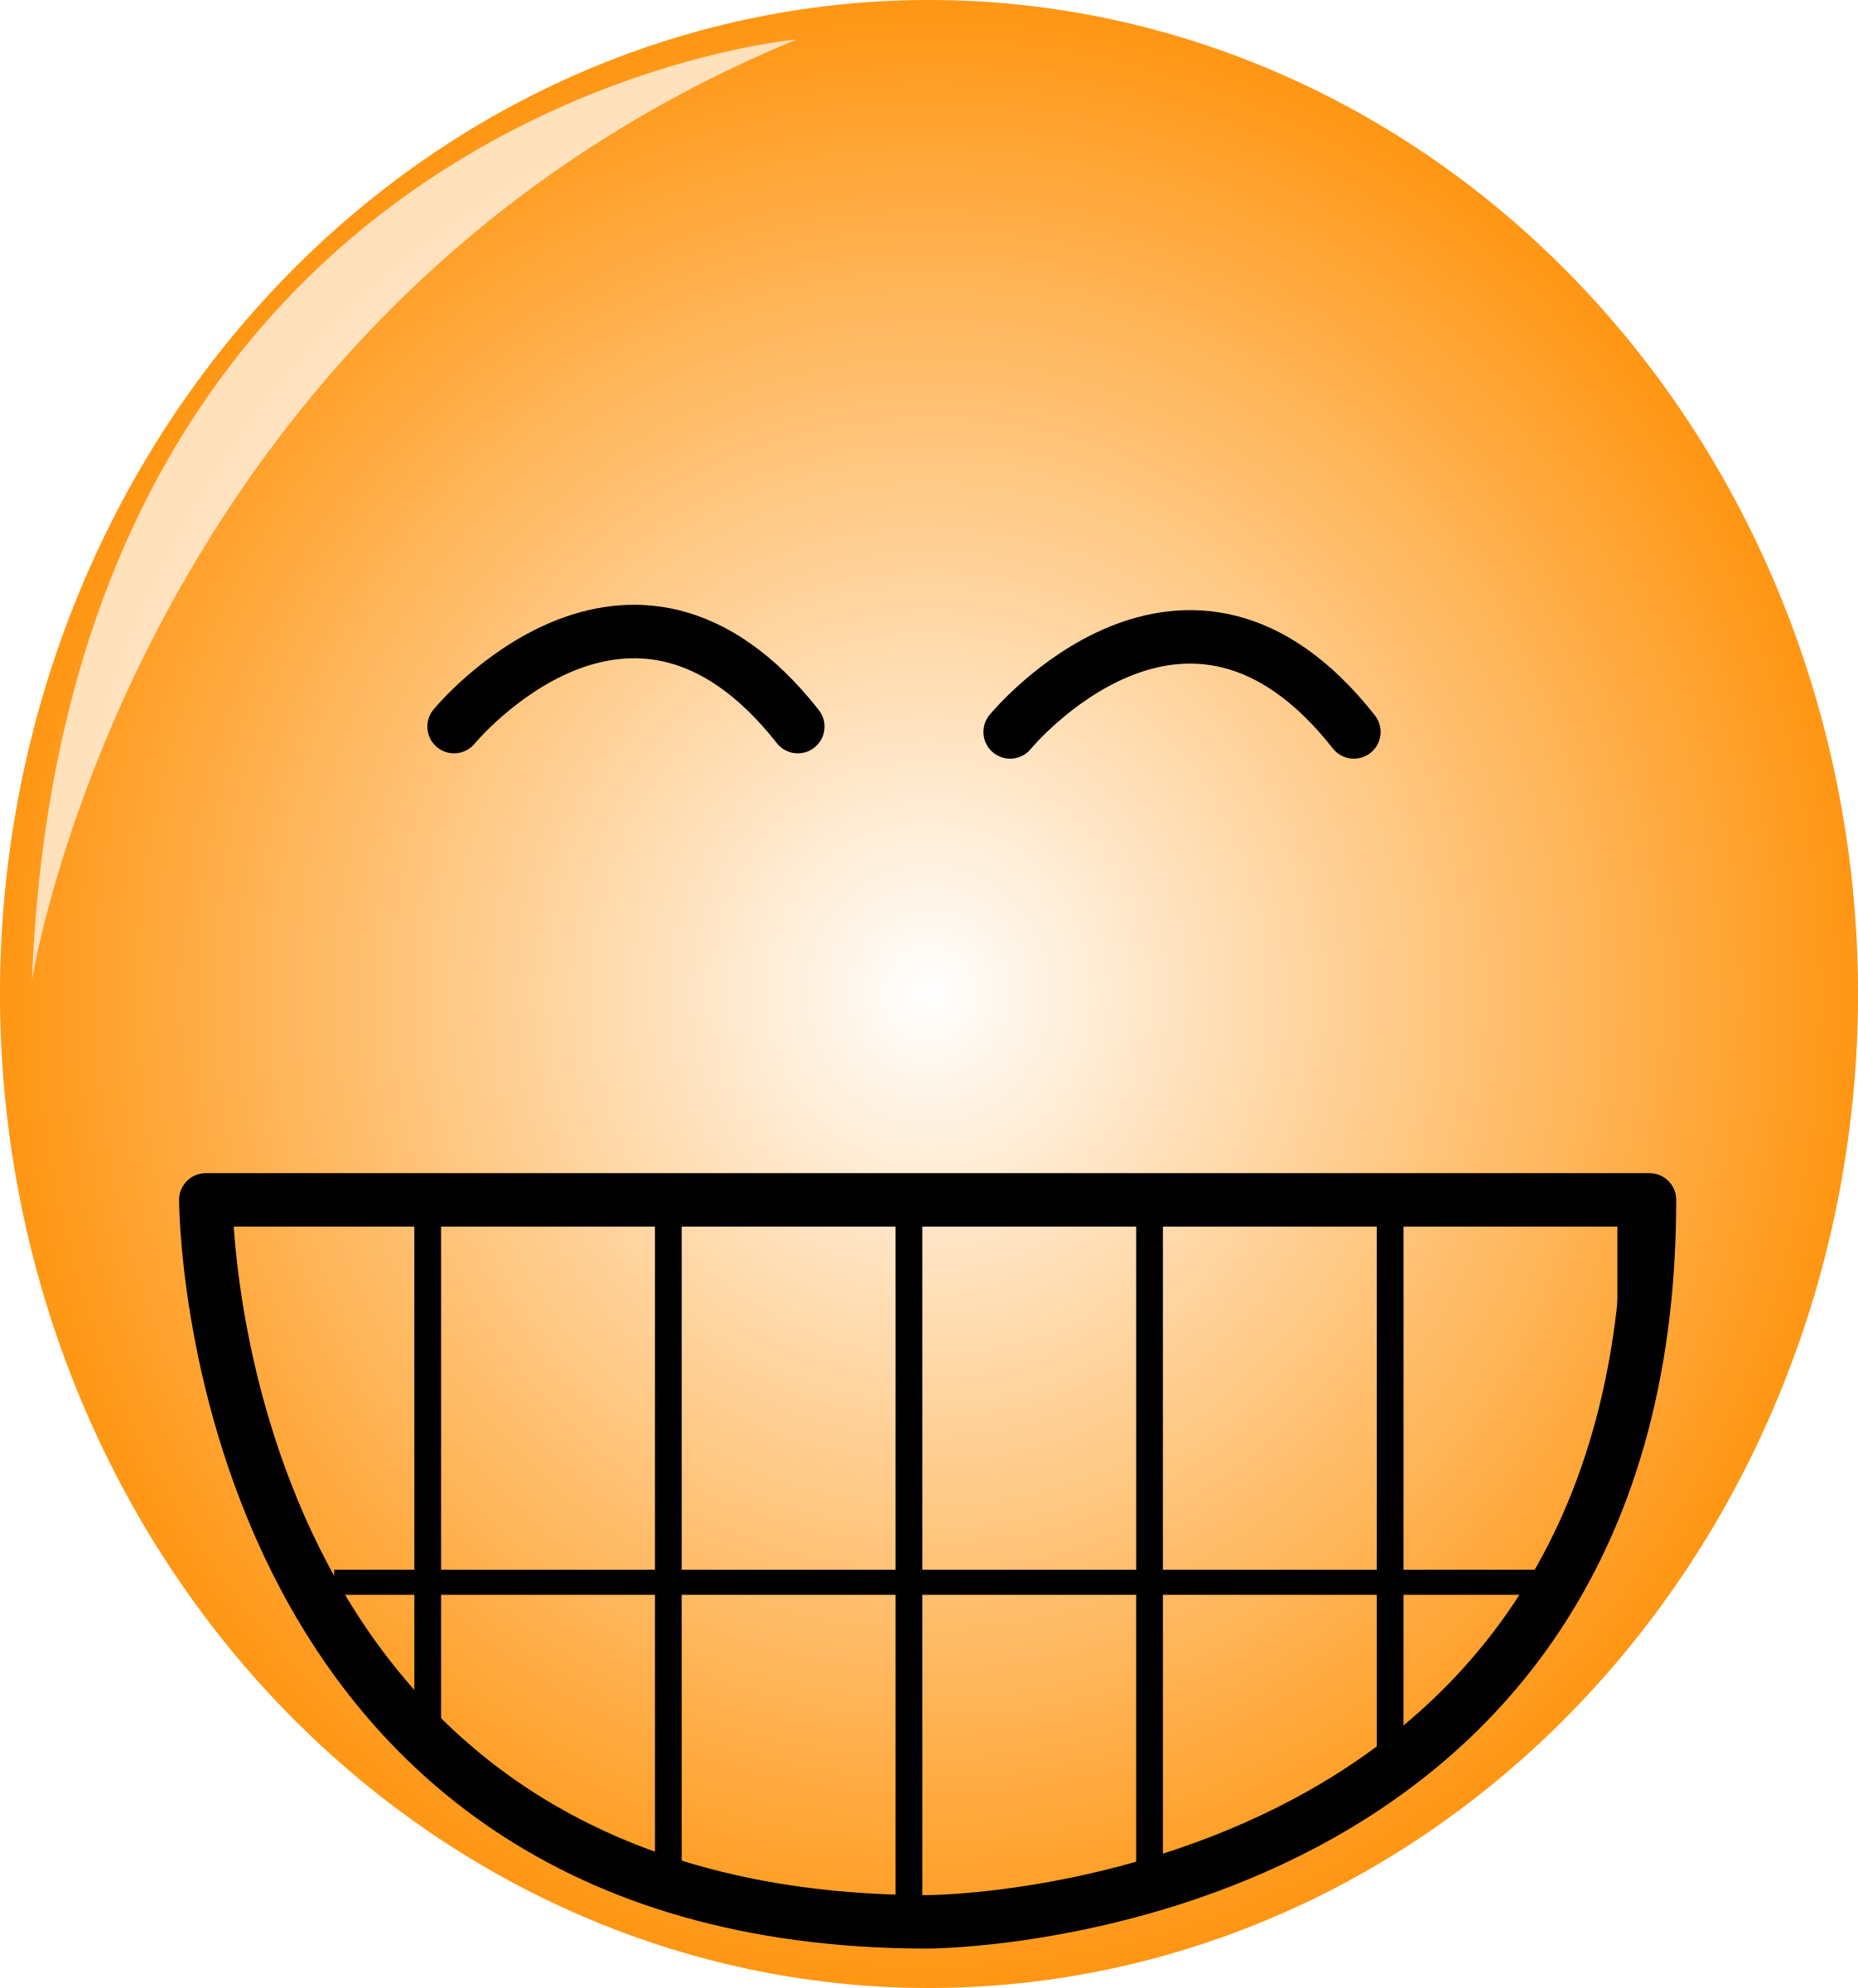 ms office clipart smiley - photo #12